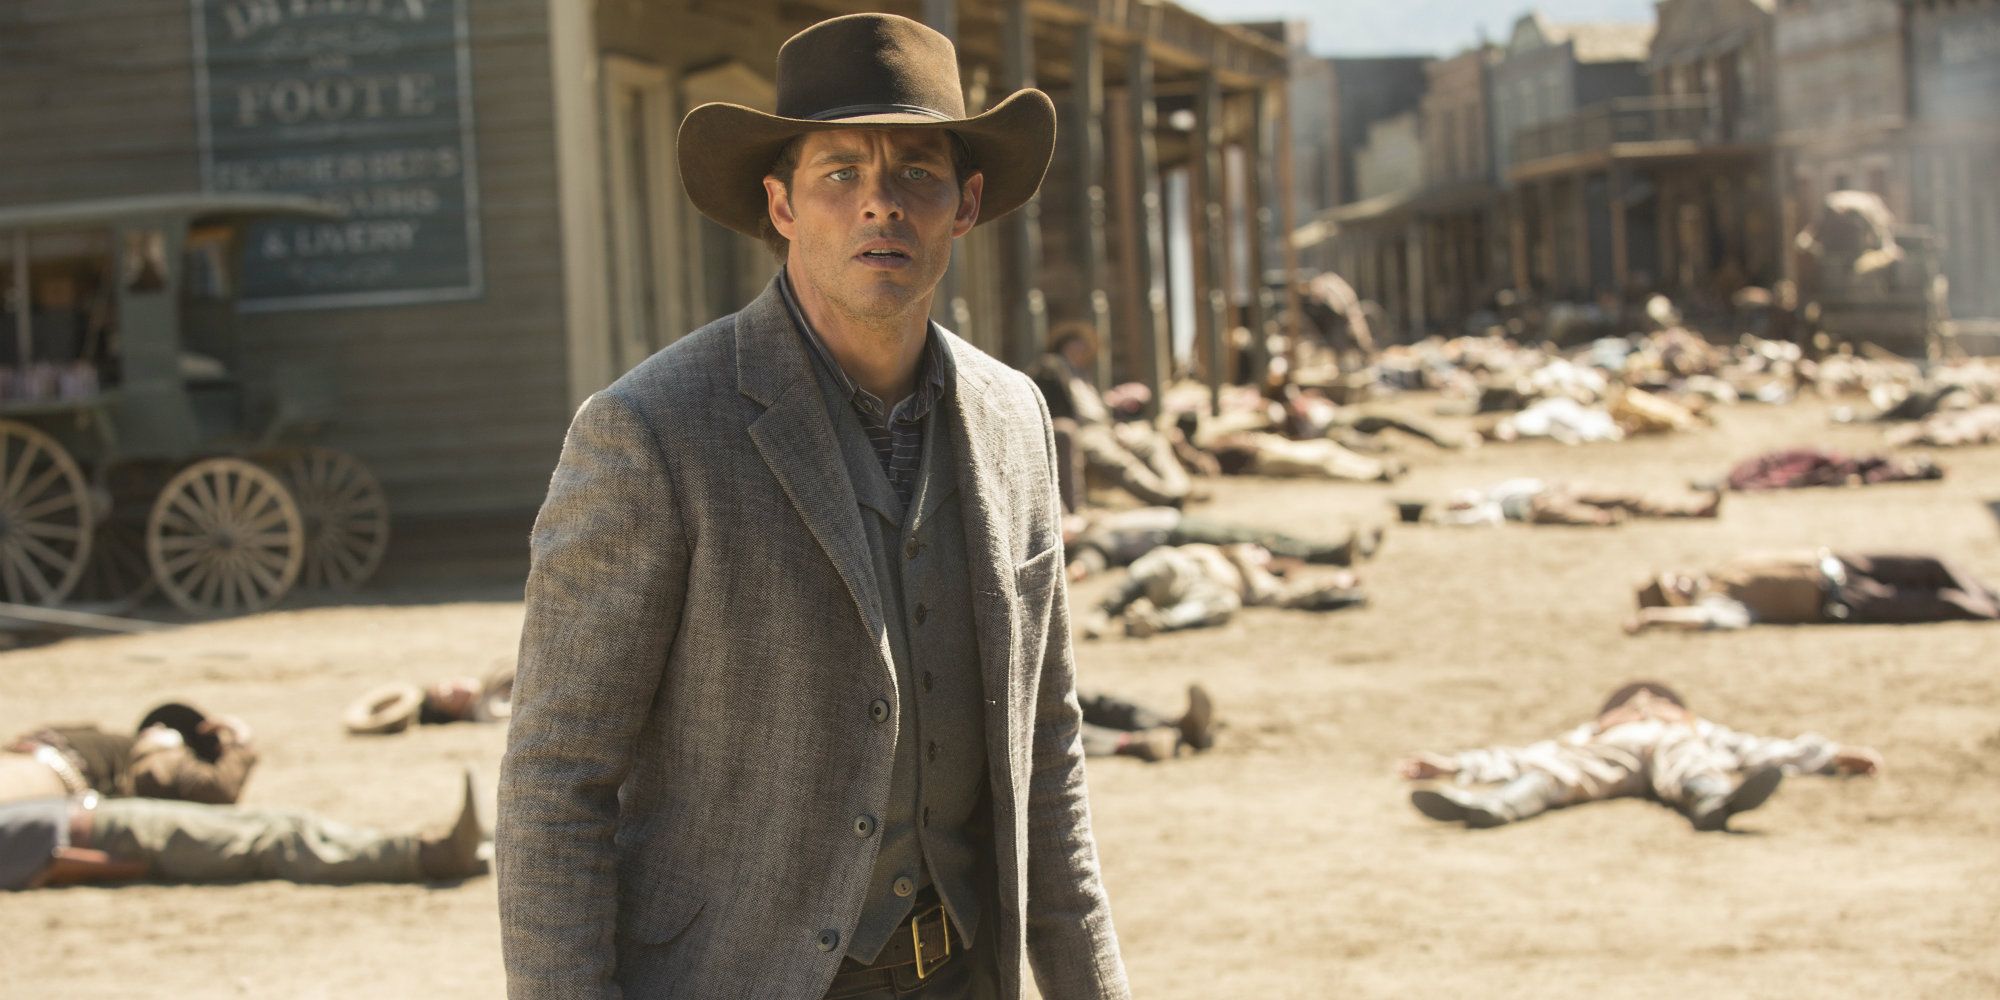 Teddy standing on a street with dead bodies in Westworld